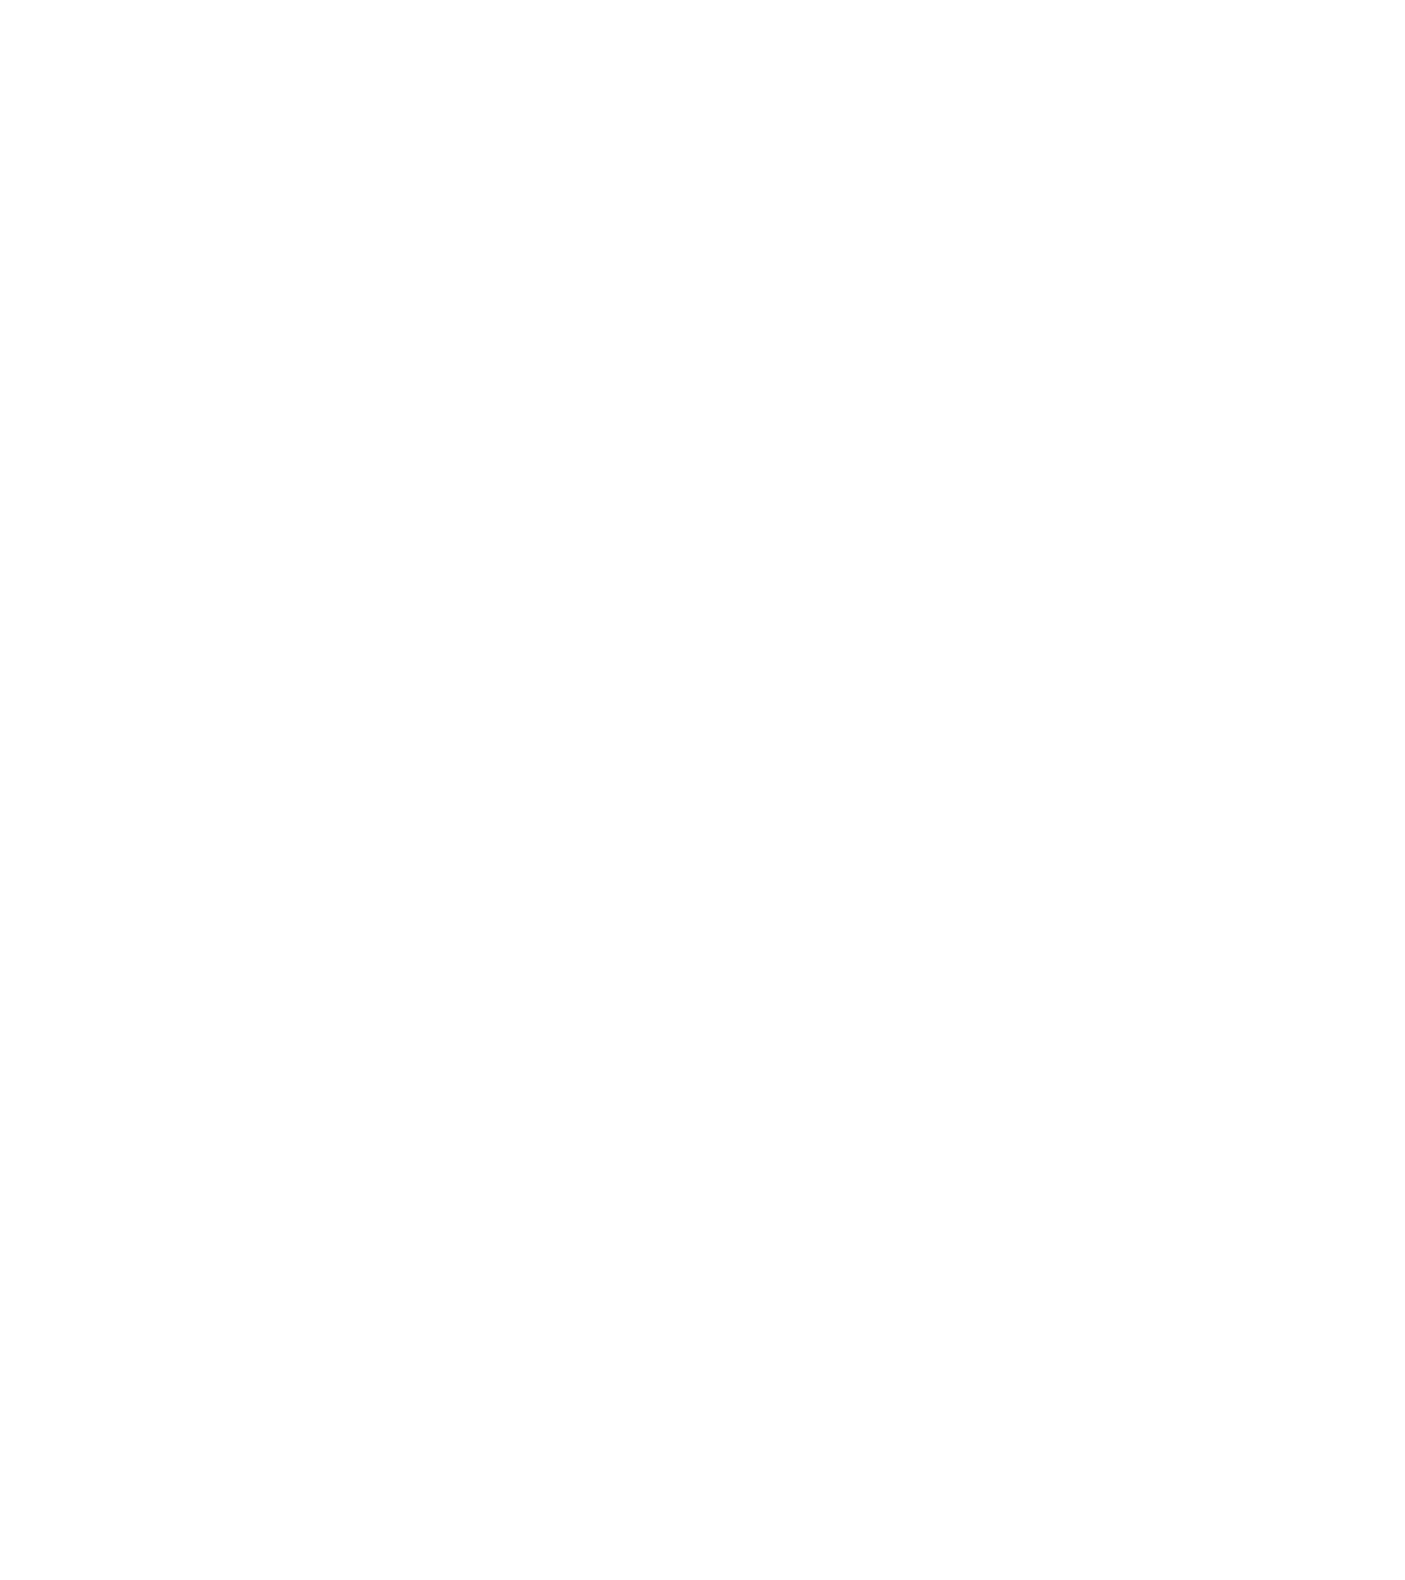 Oeneo logo for dark backgrounds (transparent PNG)